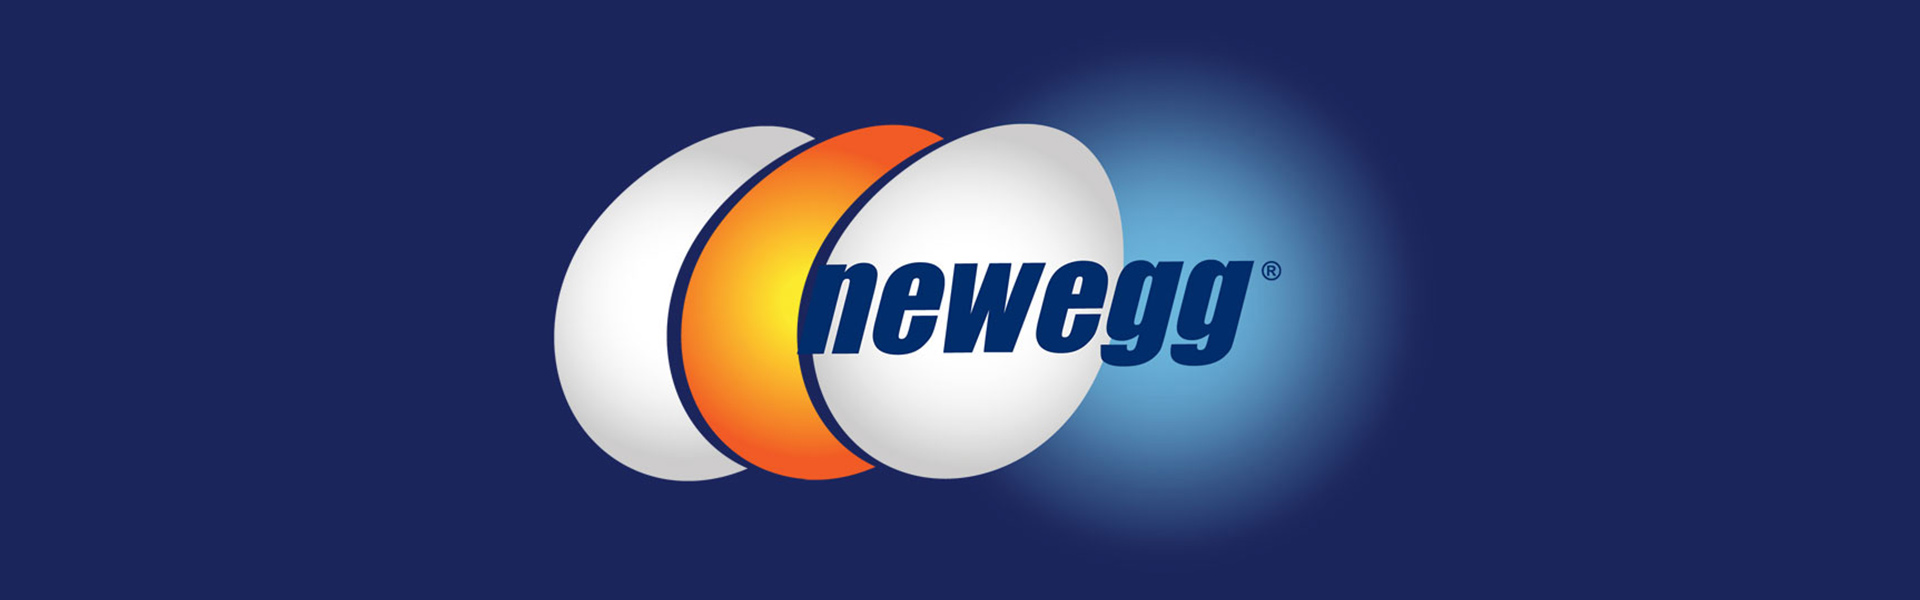 Newegg Provides Second Half and Full Year 2021 Financial Forecasts and Opens Limited Trading Window for Restricted Shares